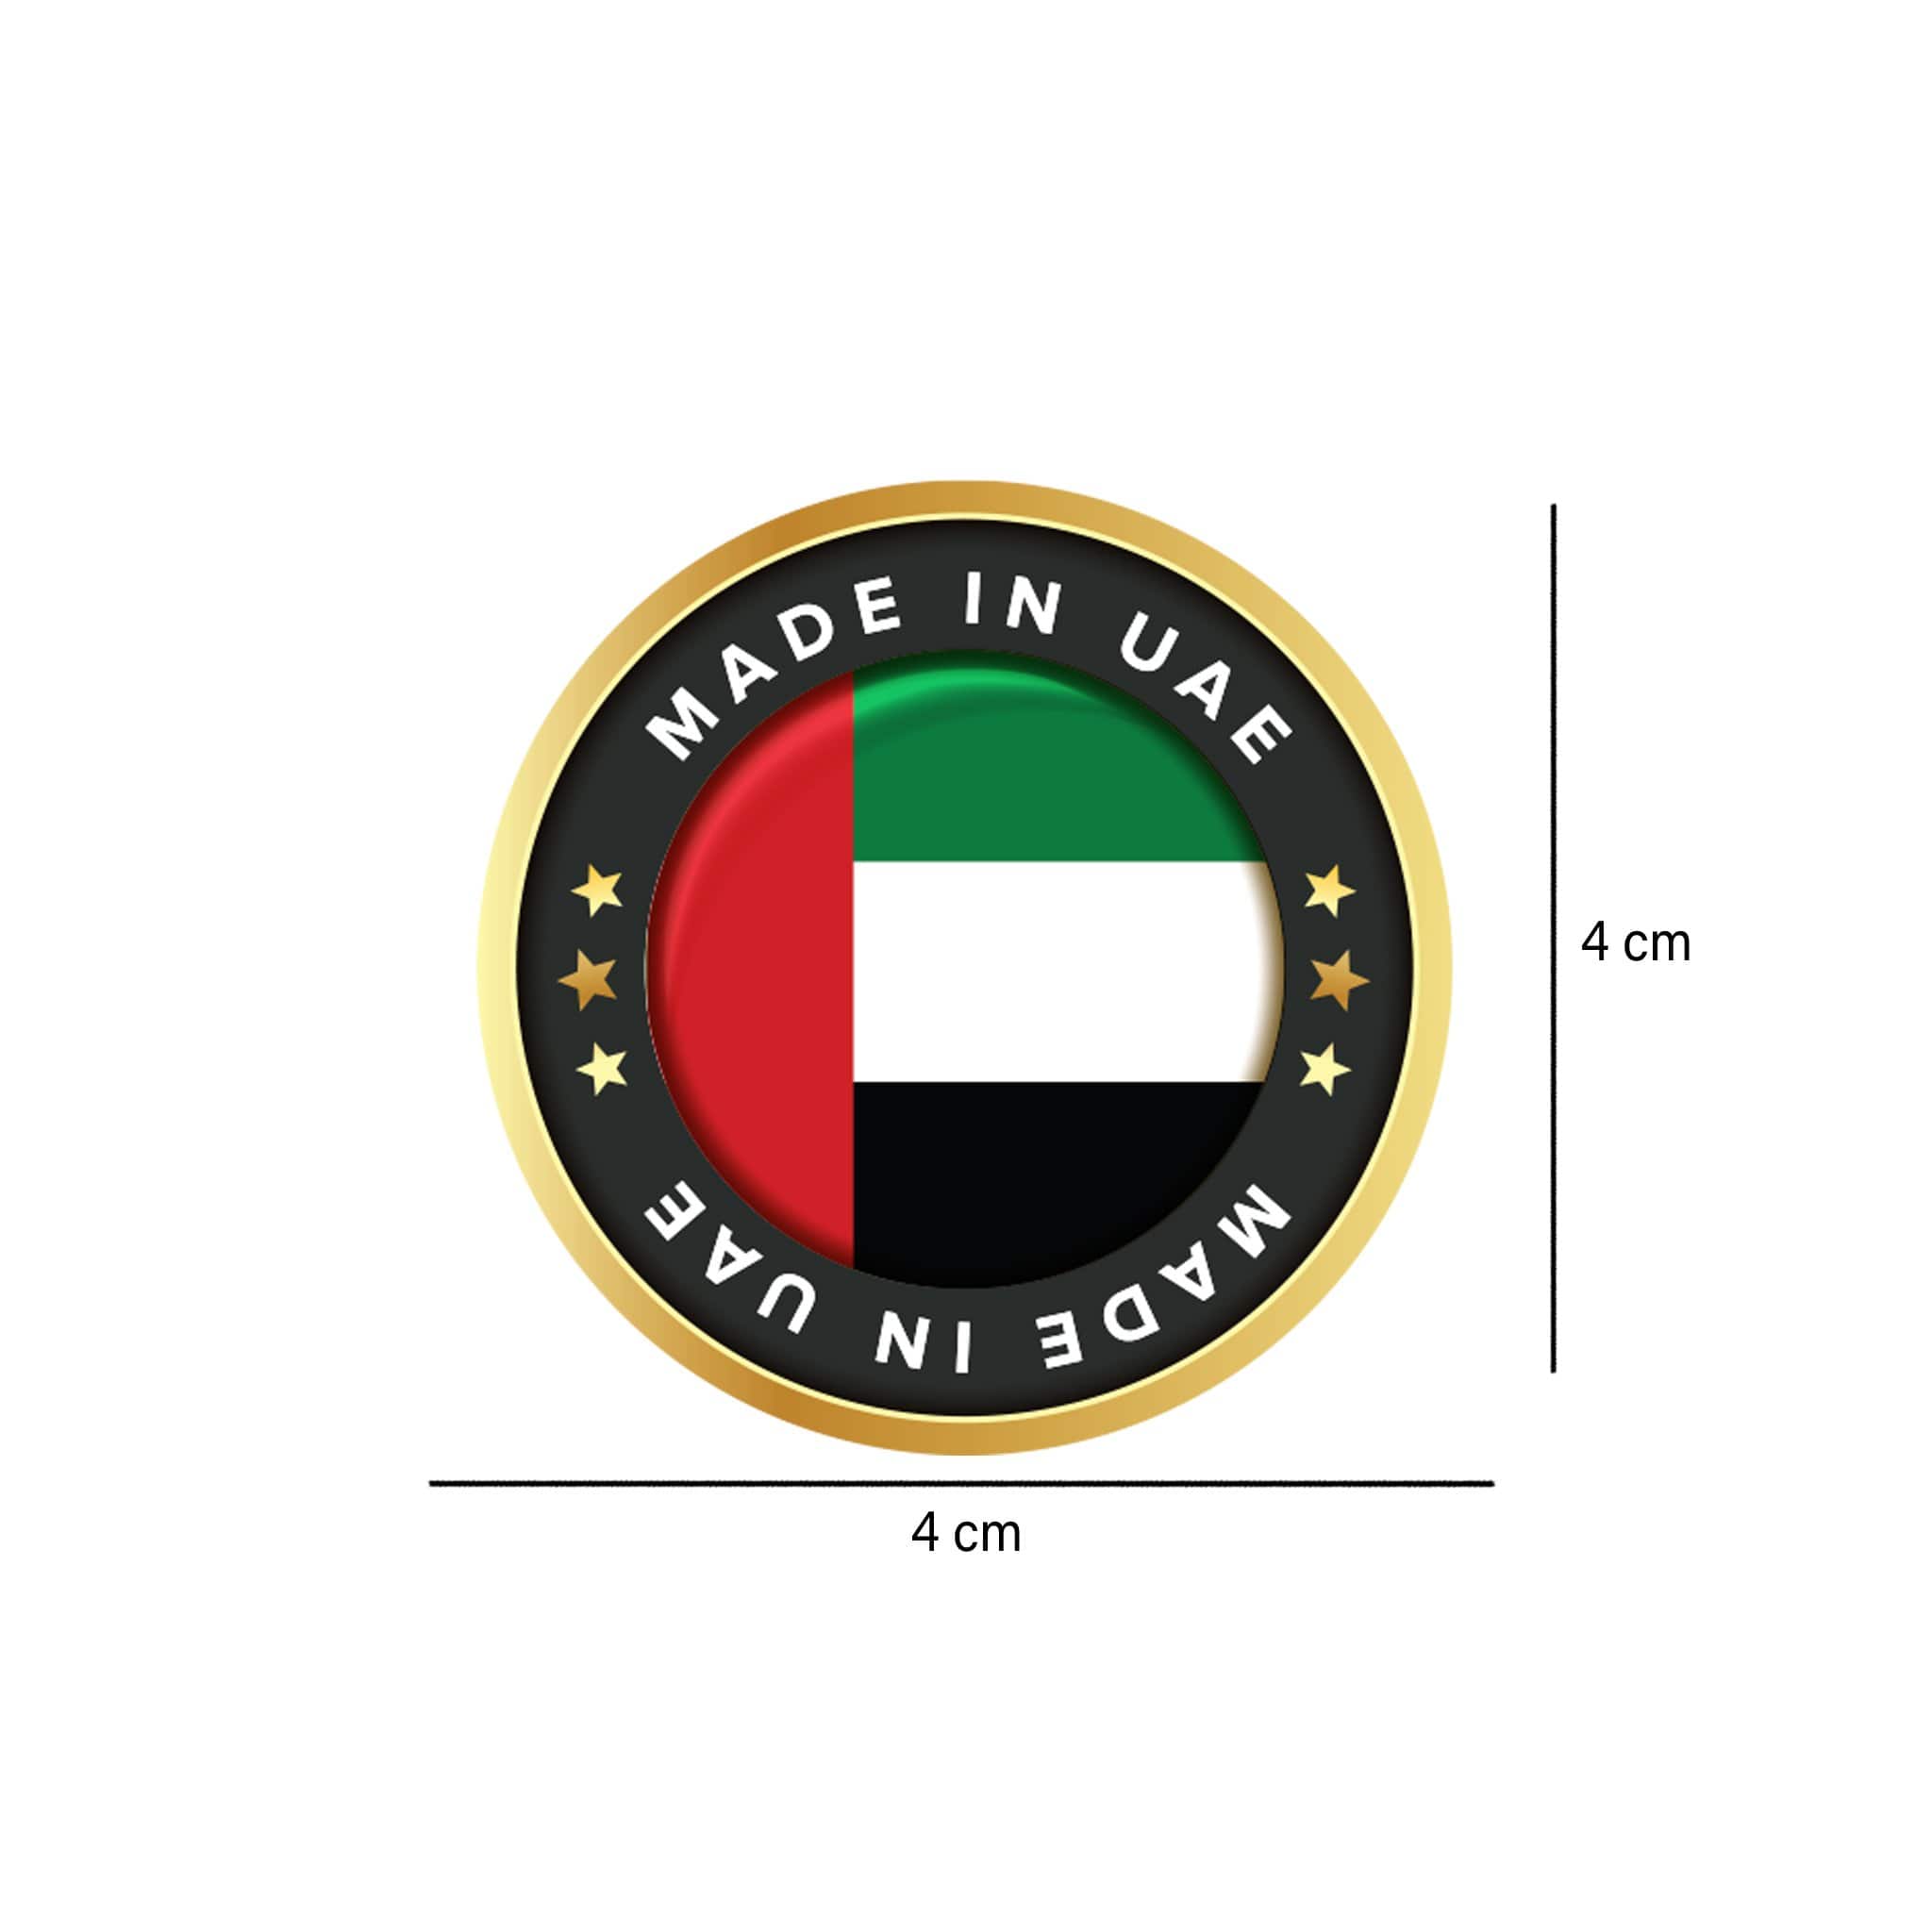 English Made In UAE Sticker Roll 250 Pieces - Hotpack Global